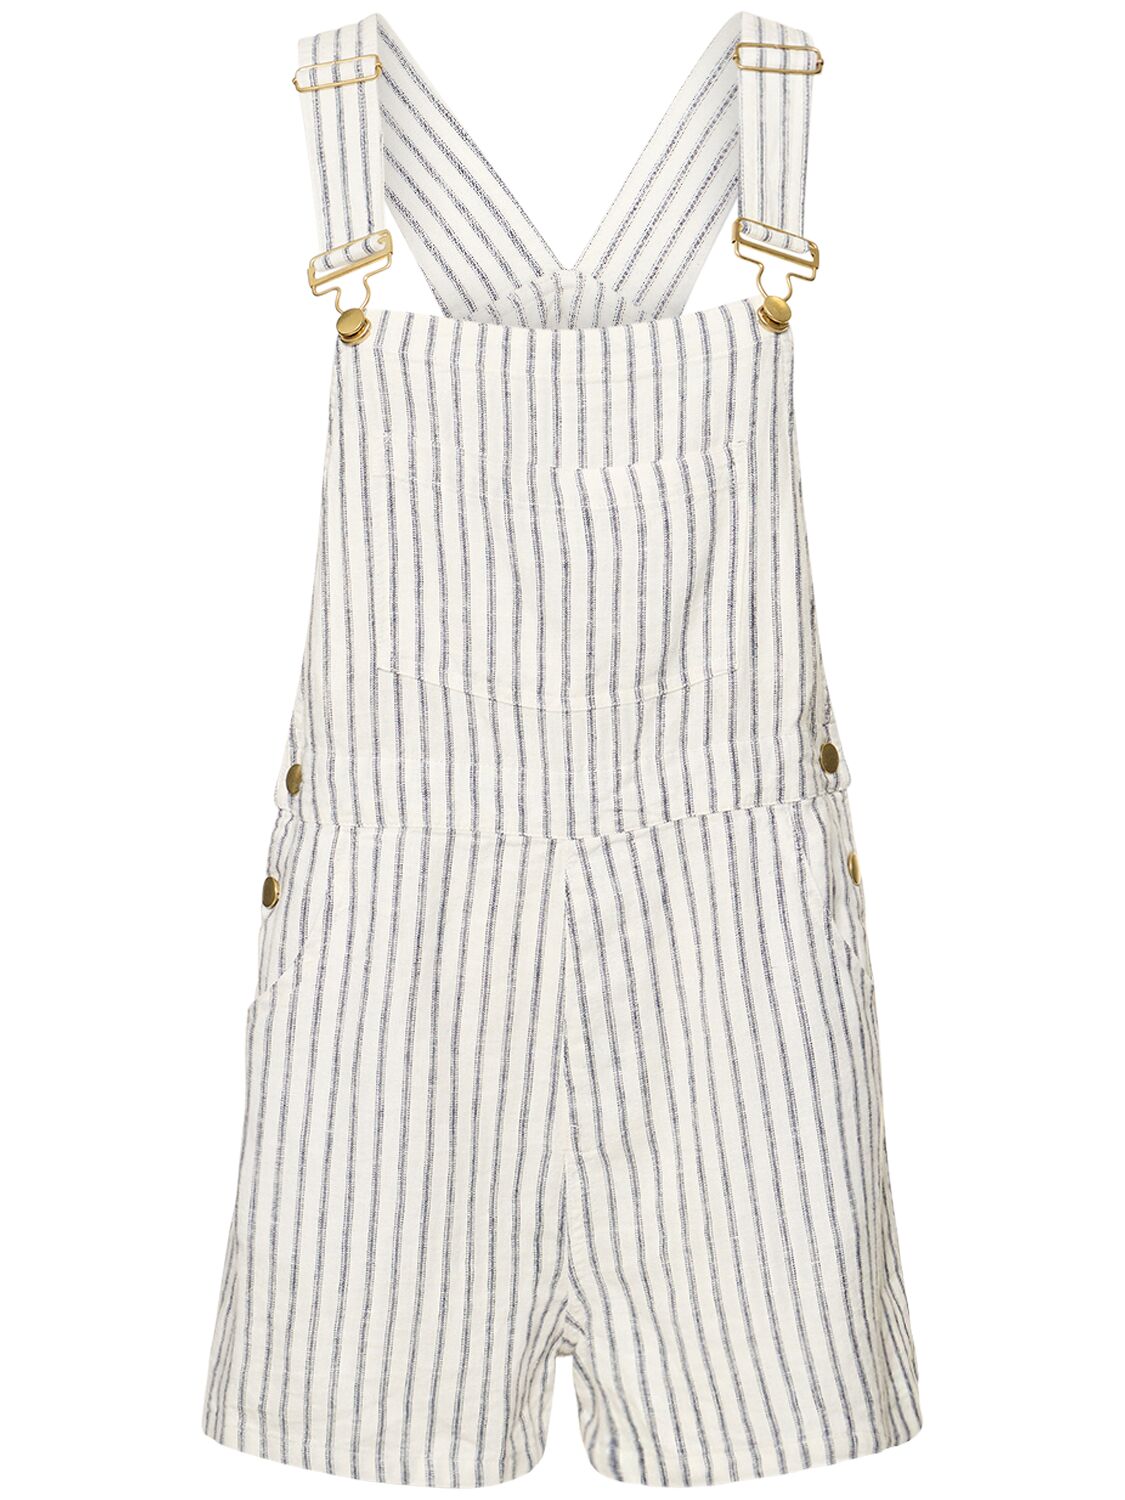 WEWOREWHAT STRIPED LINEN BLEND PLAYSUIT